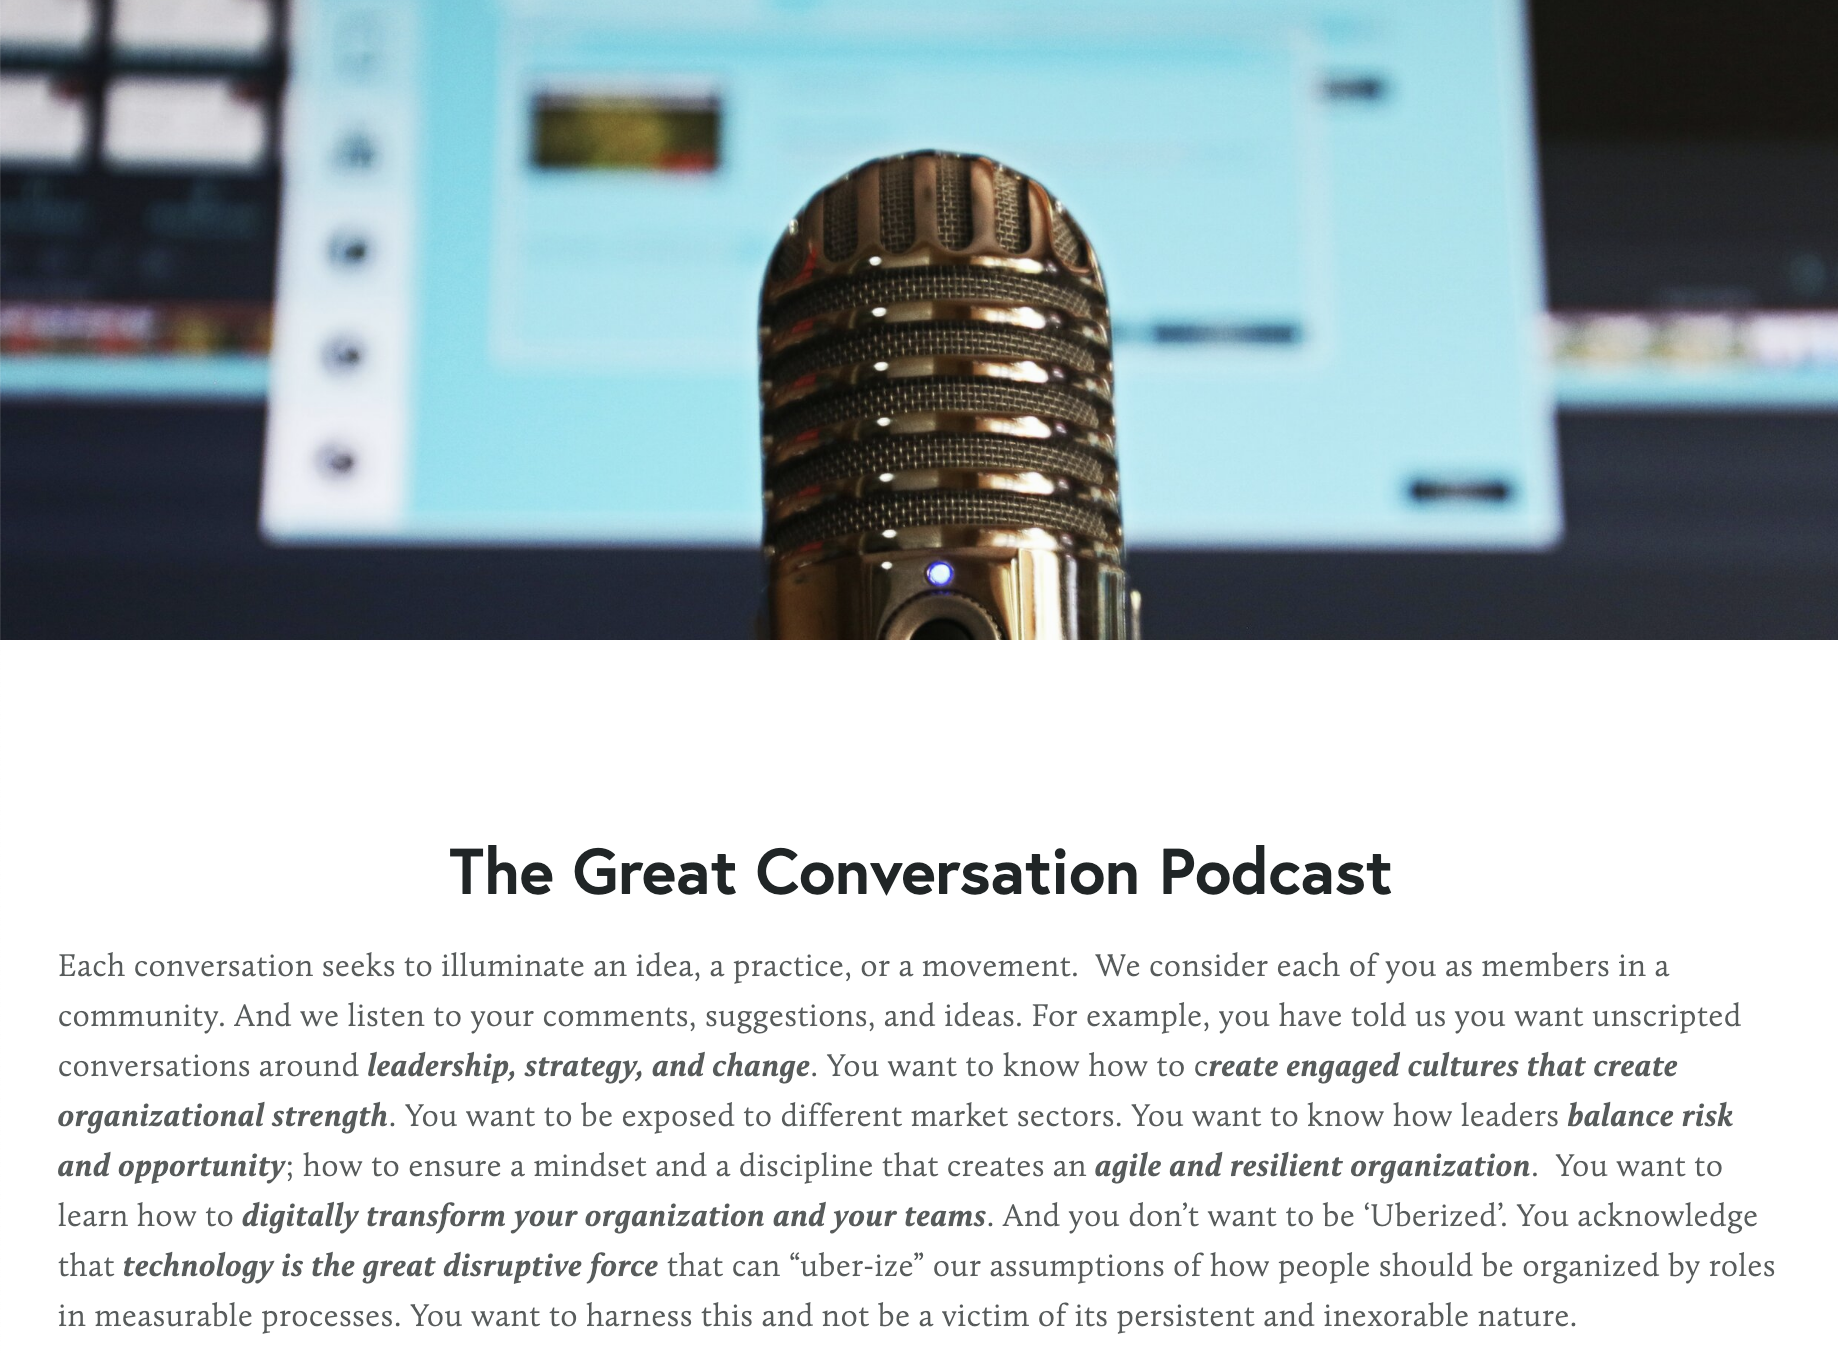 The Great Conversation - Overview